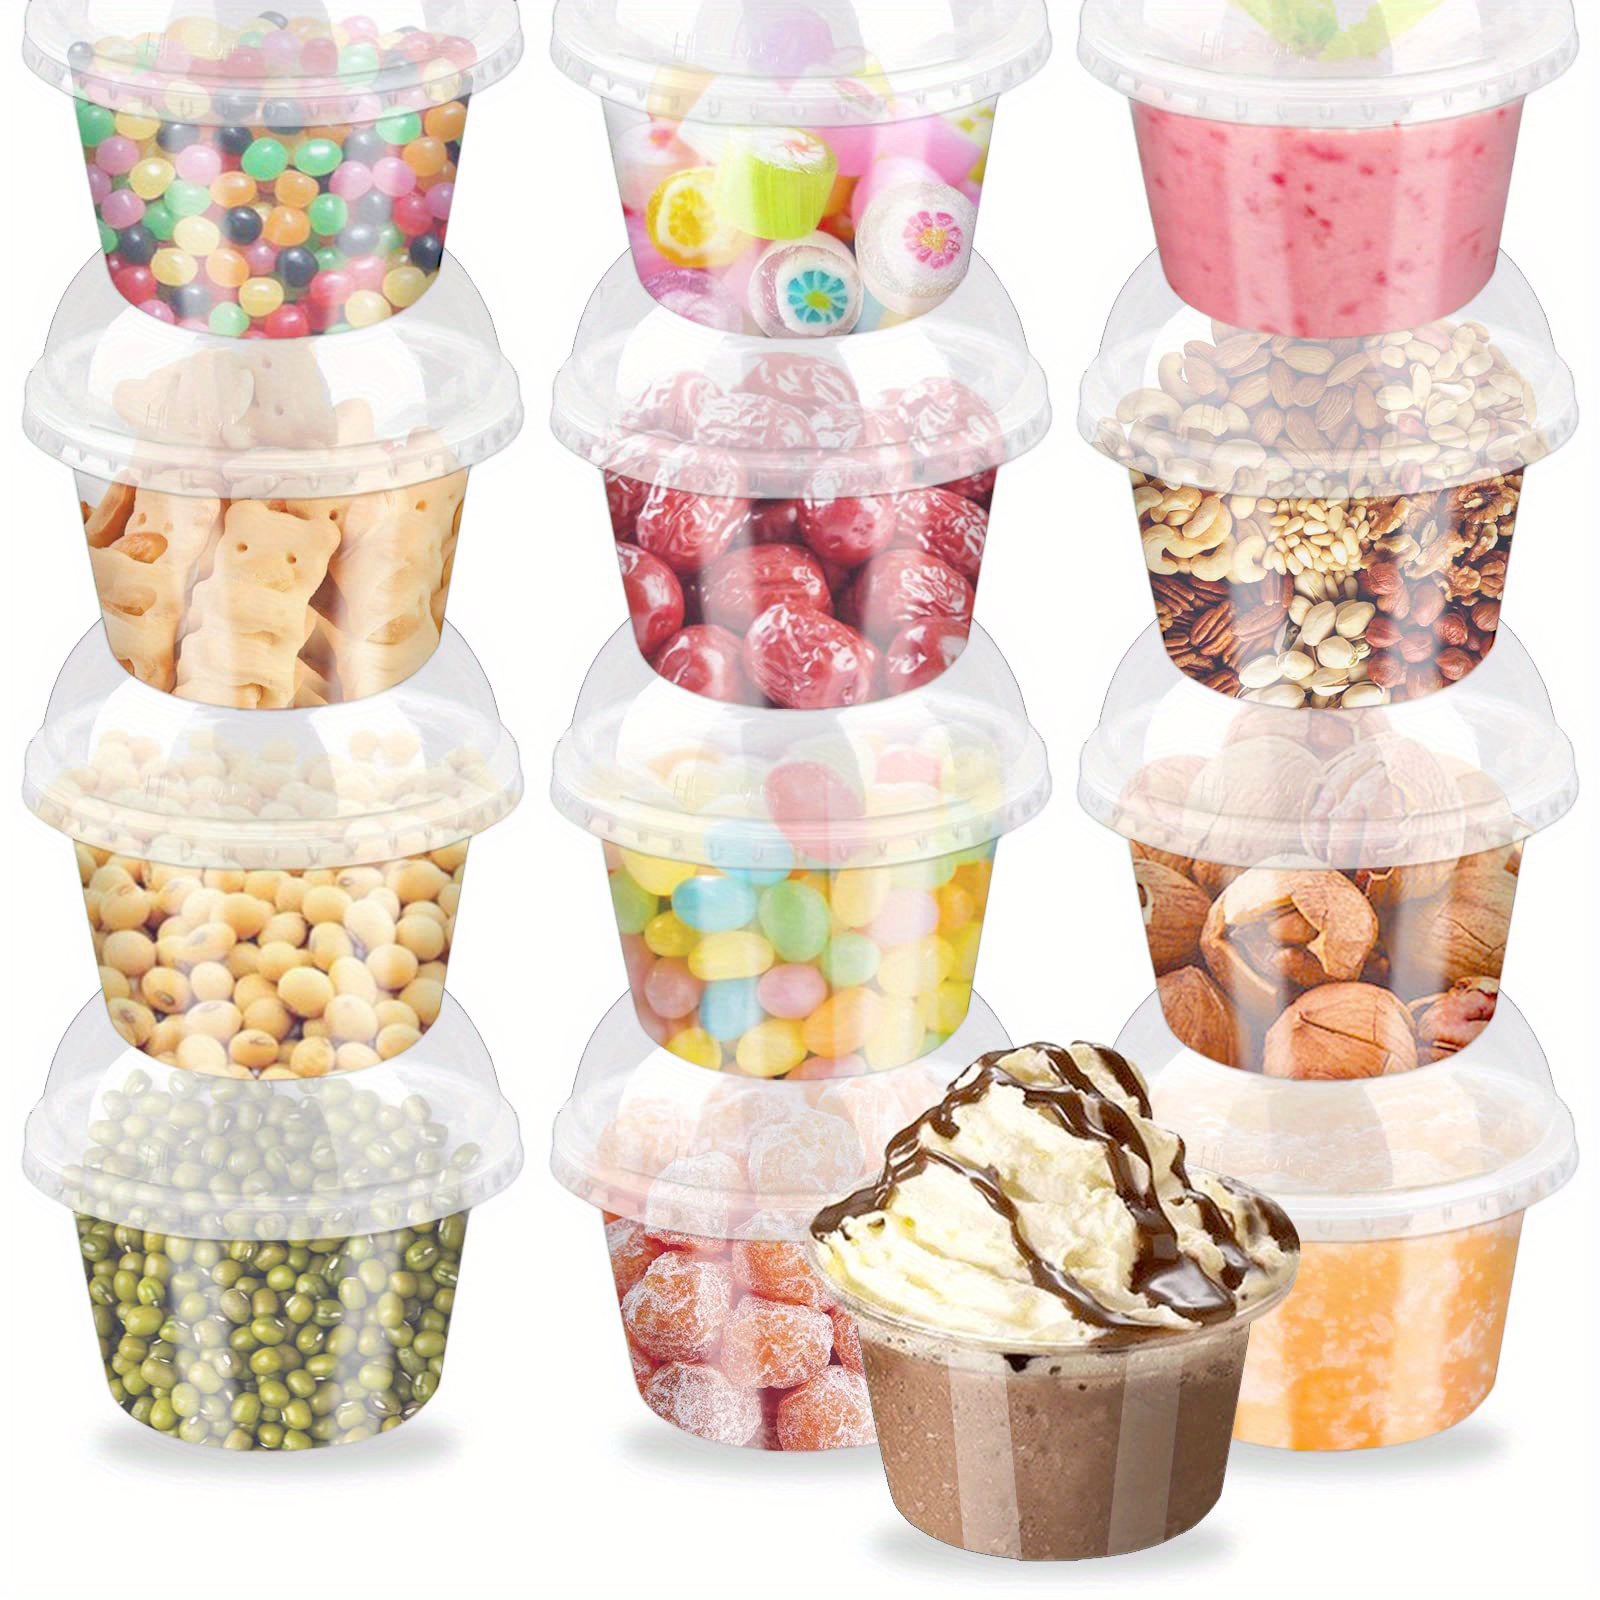 50-Pack 5 oz Plastic Dessert Cups with Lids - Bulk Ice Cream Containers  with Dome Lids (Clear)